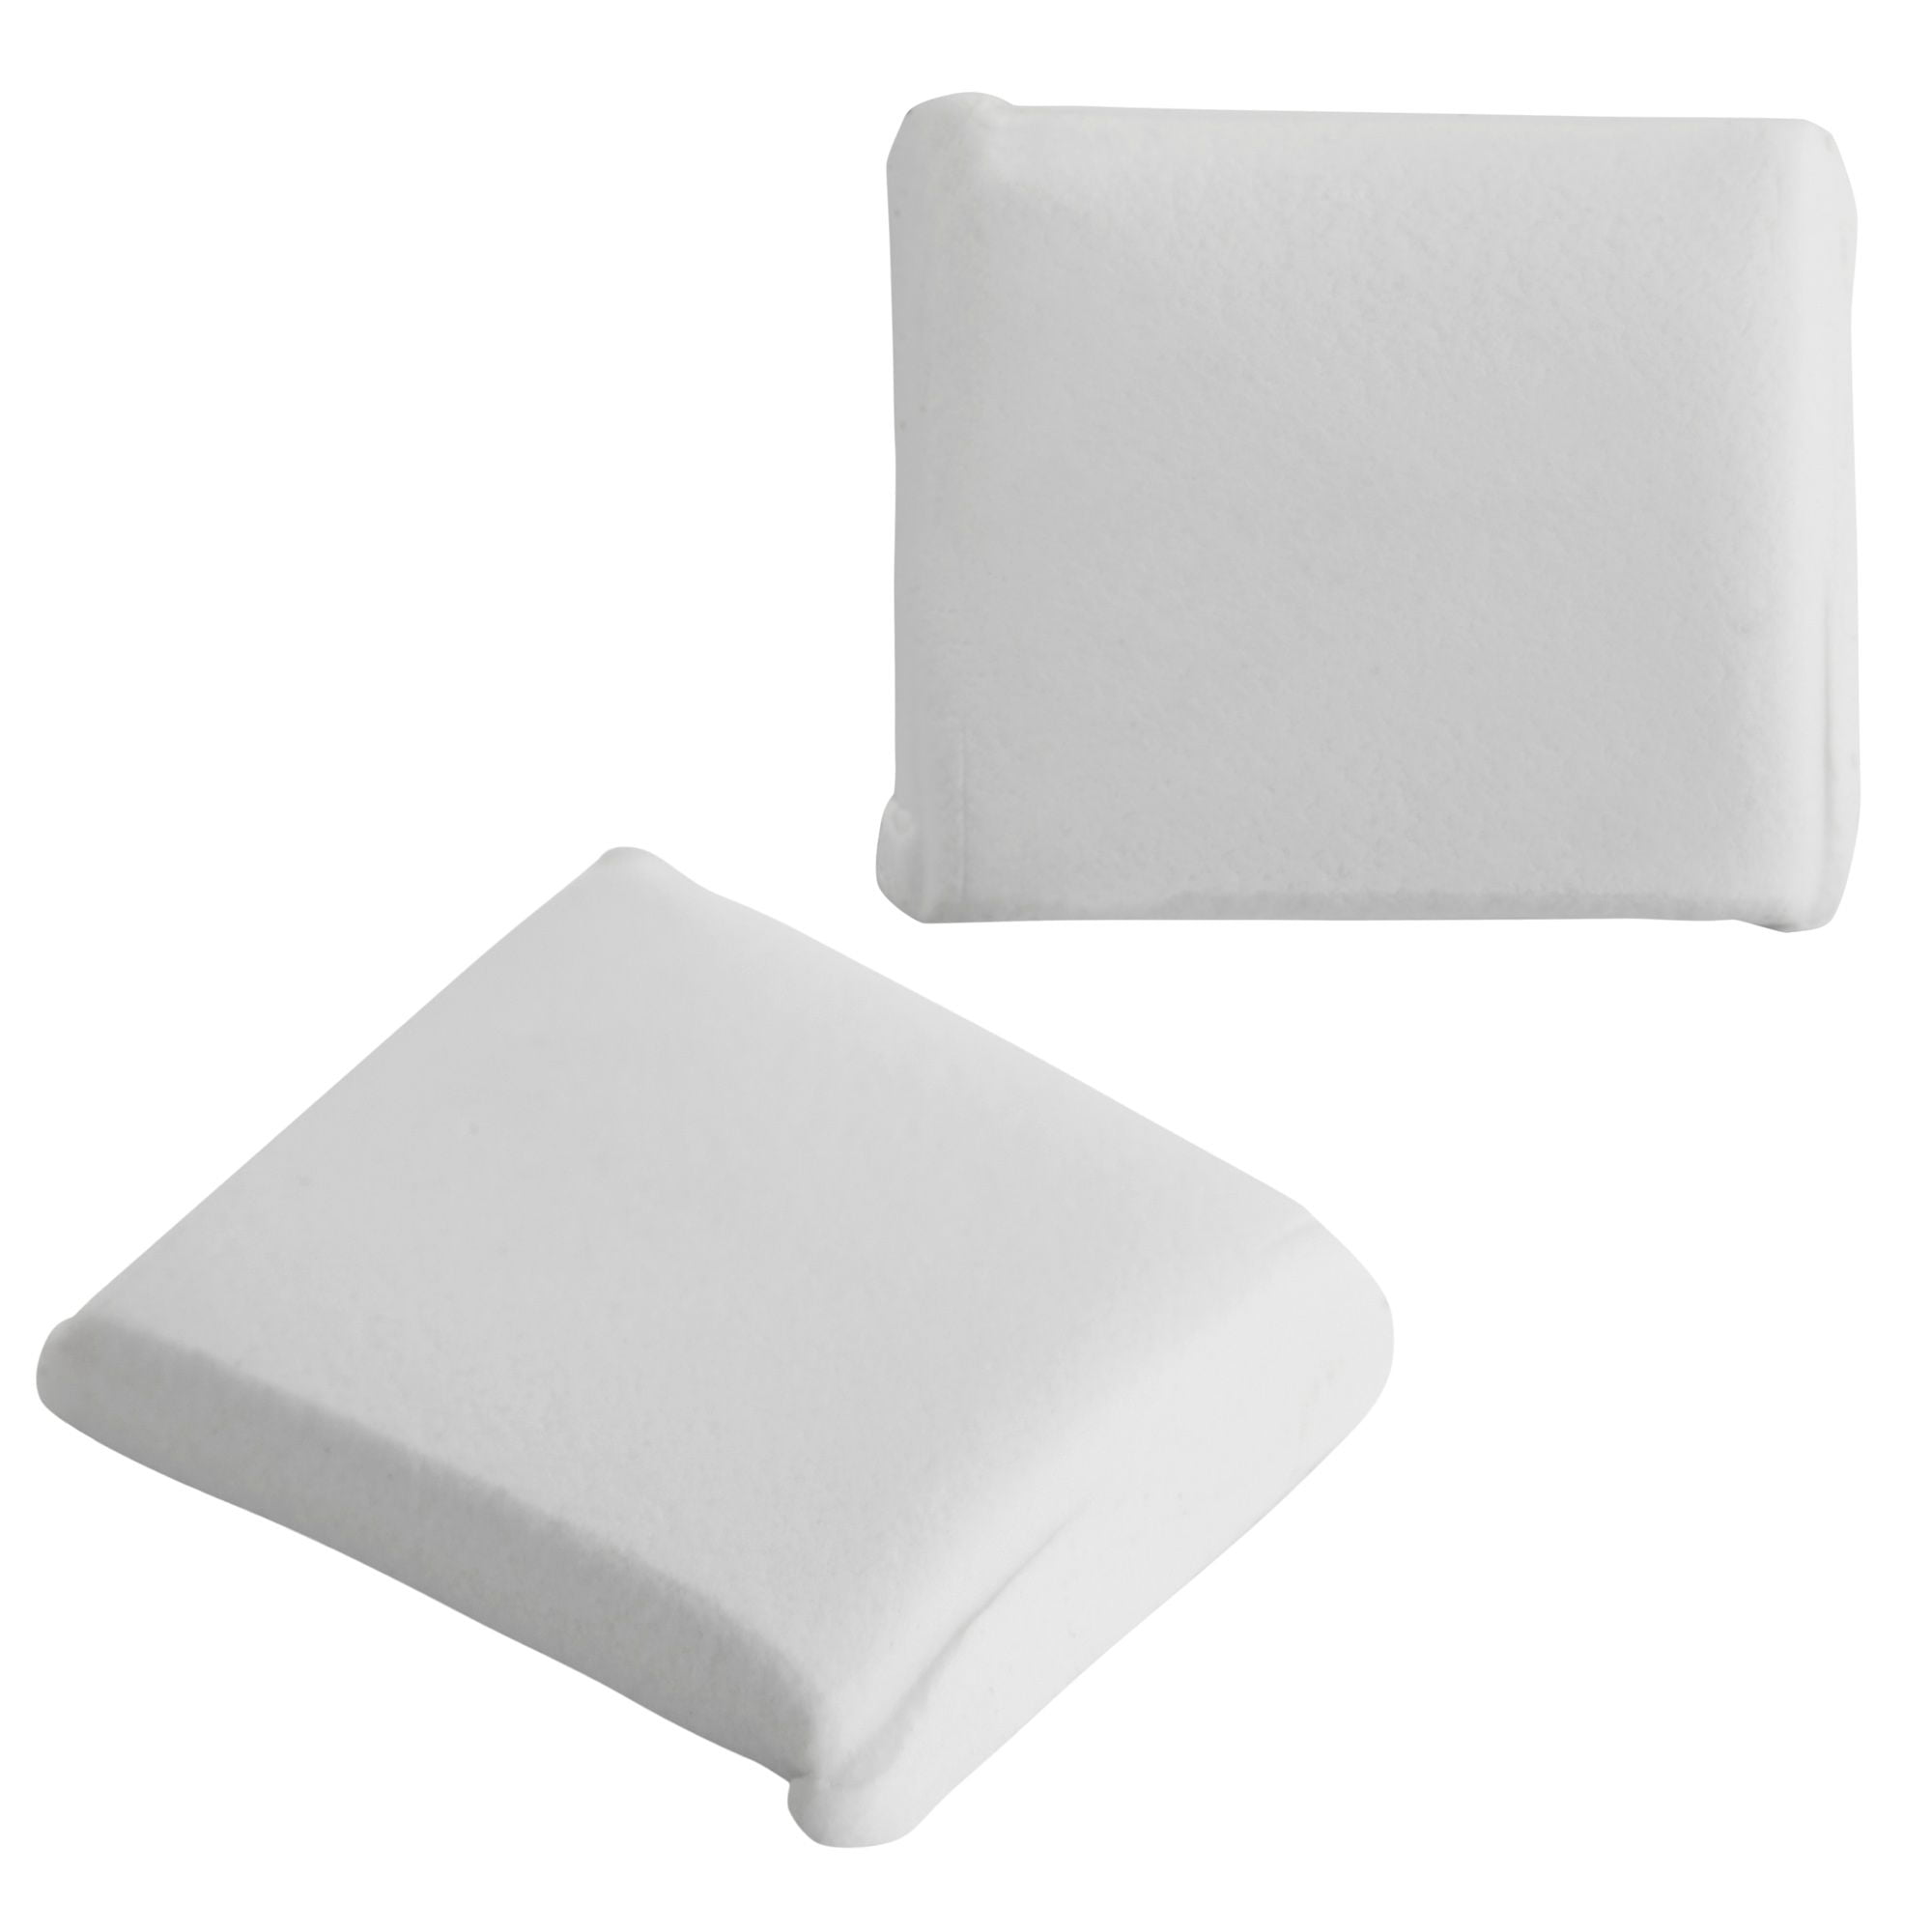 Teissuly Reusable Removable Adhesive Tacky Putty White Tack